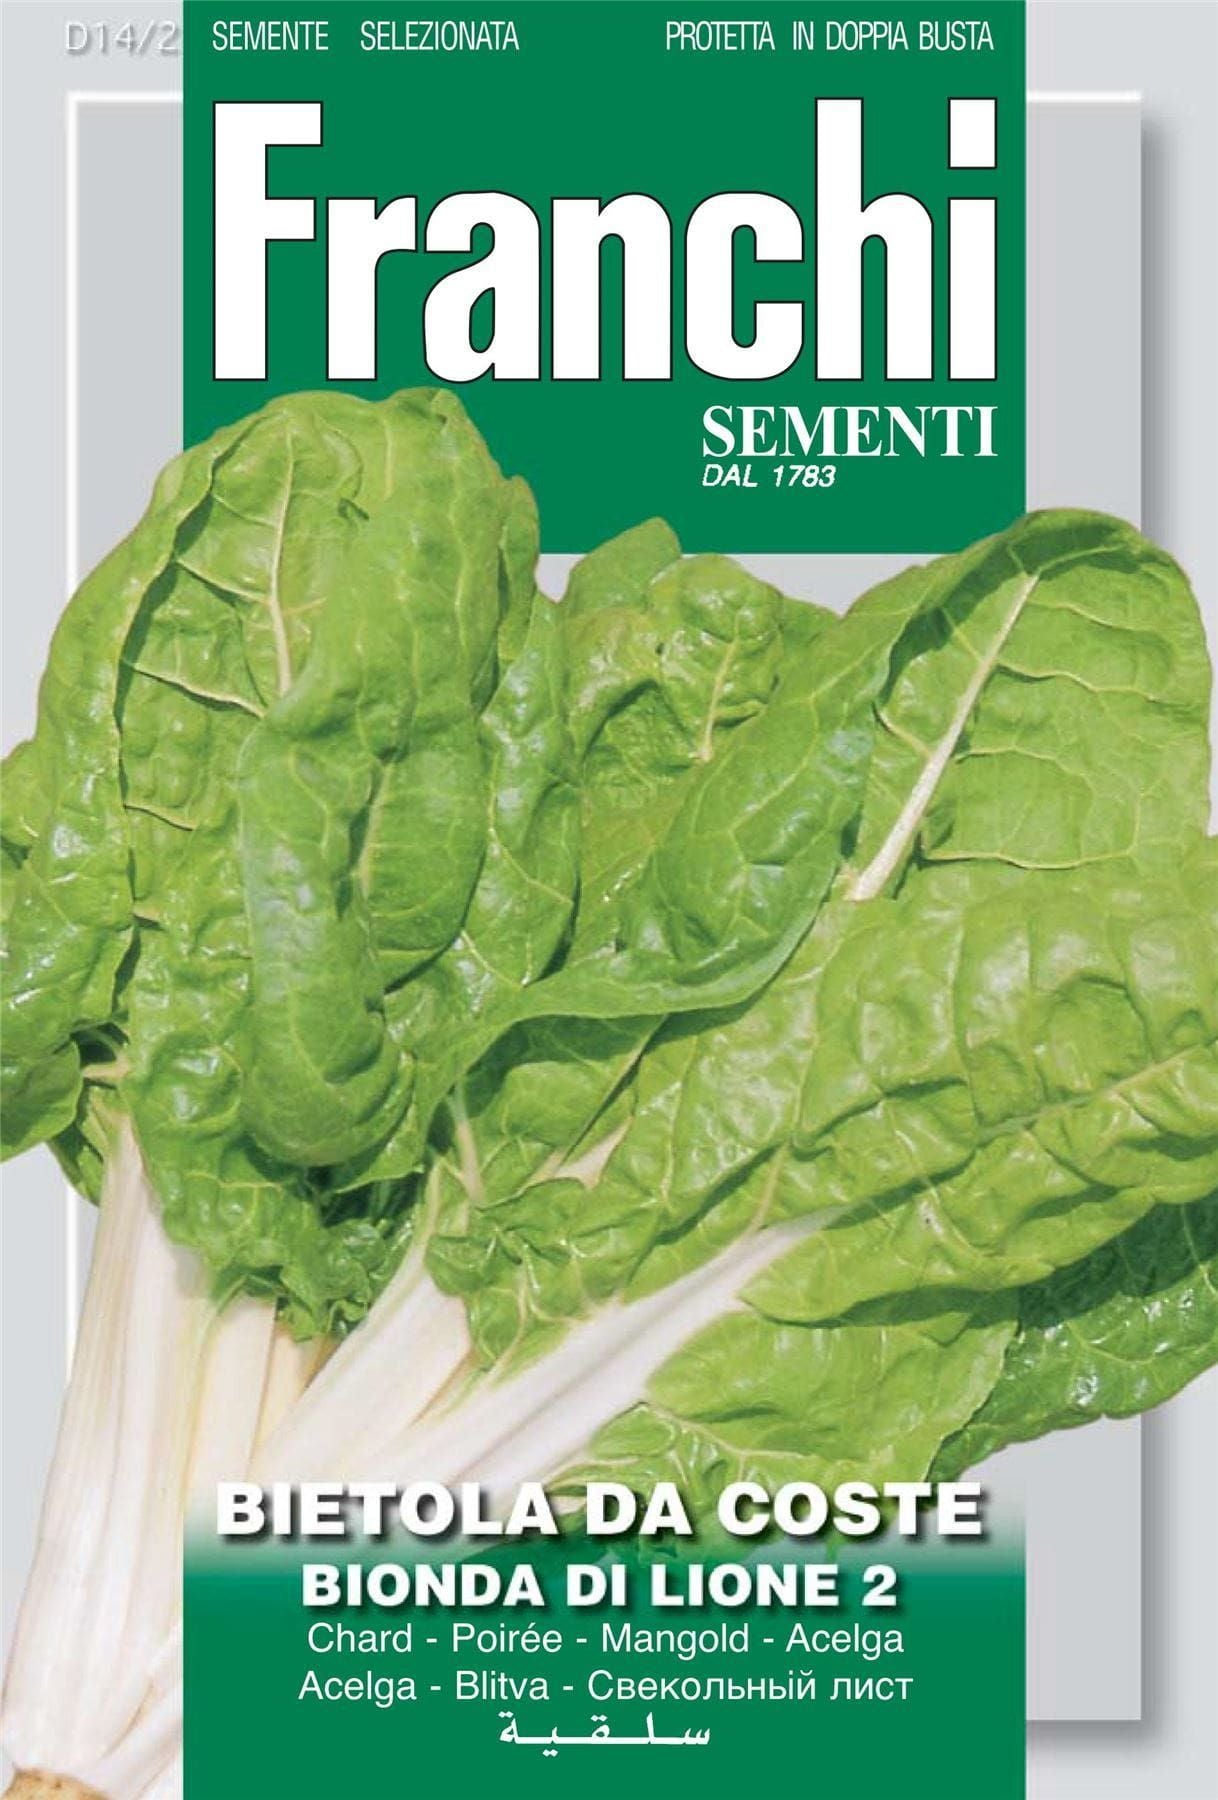 Franchi Seeds of Italy - DBO 14/2 - Swiss Chard - Bionda Di Lione 2 - Seeds